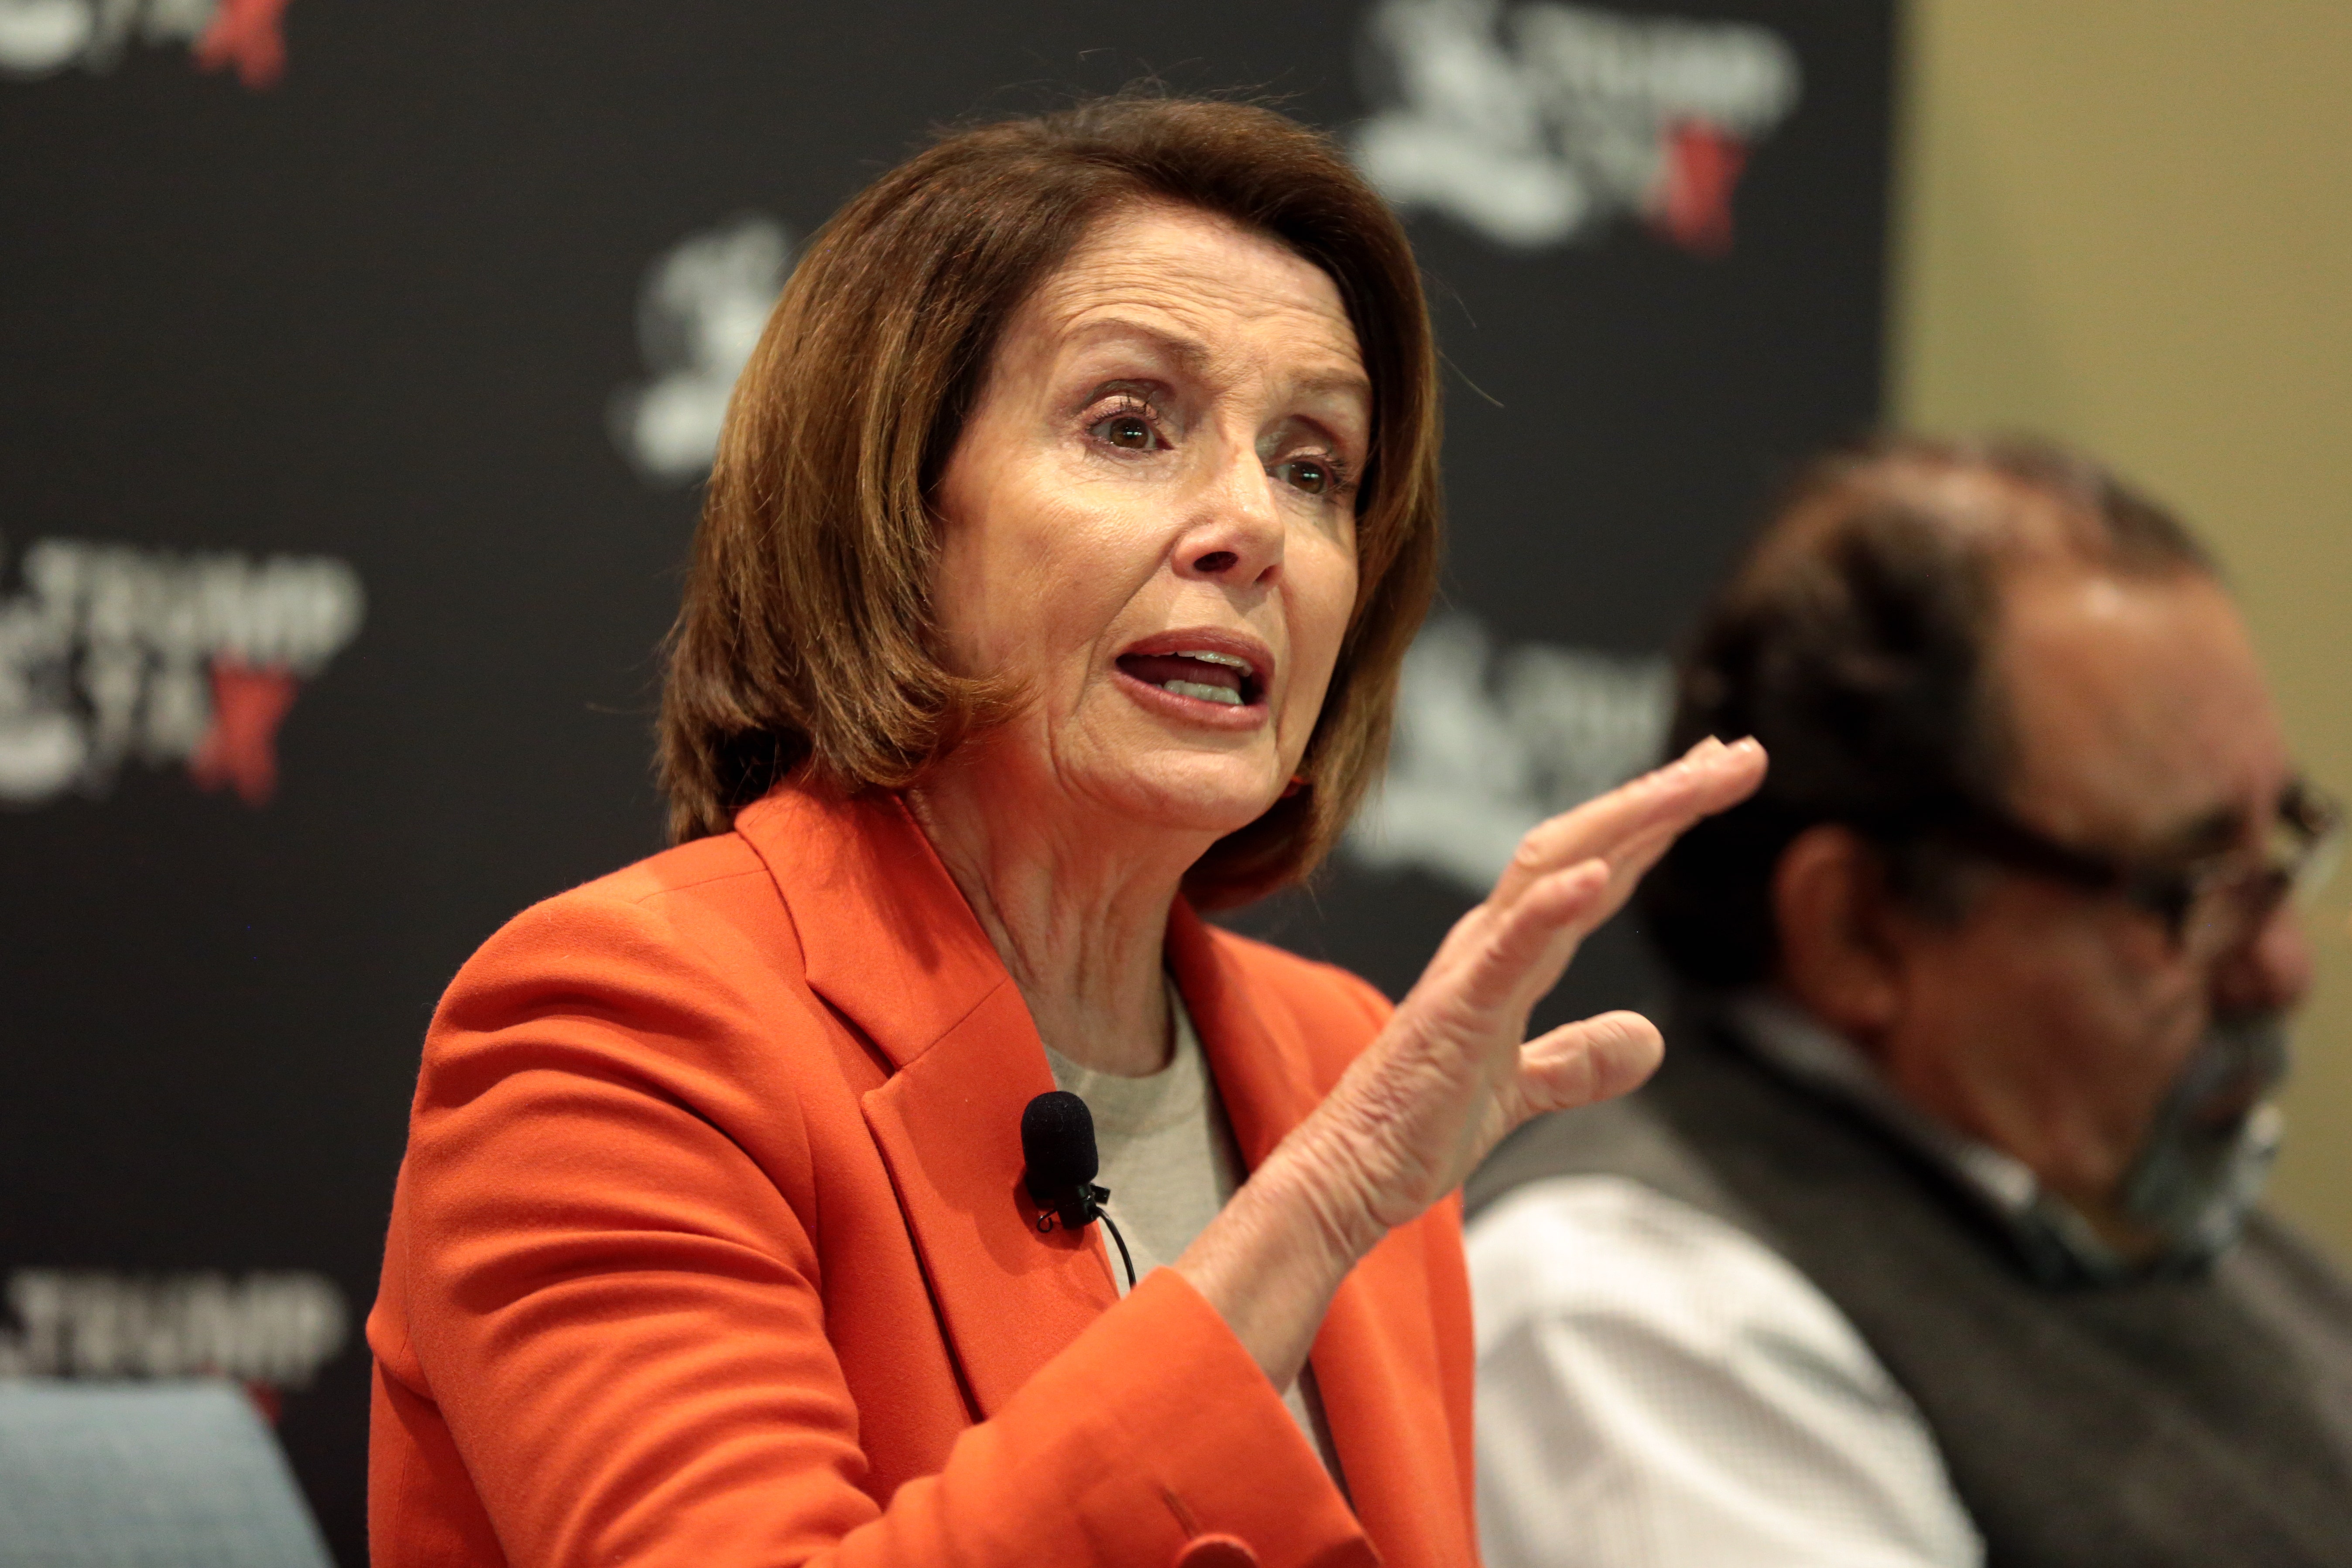 Nancy Pelosi's Husband Made Some Big Tech Purchases In May And June: Here Are The Details